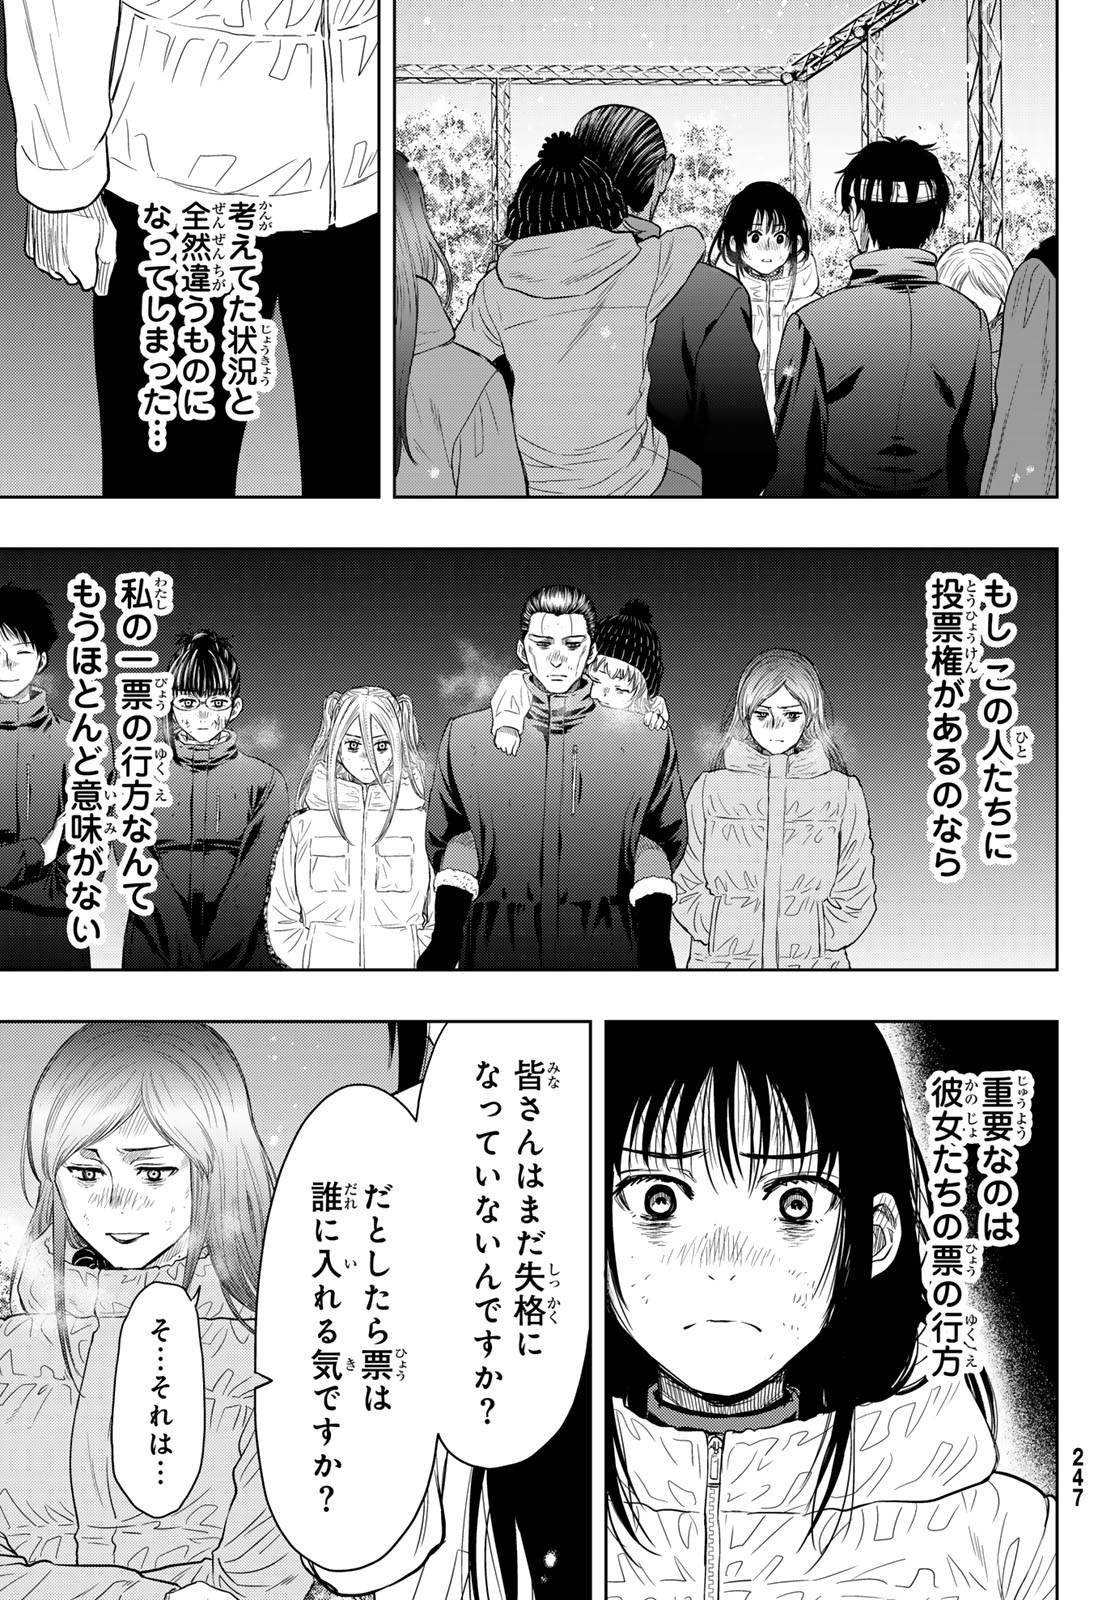 Tomodachi Game (Friends Games) - Chapter 121 - Page 3